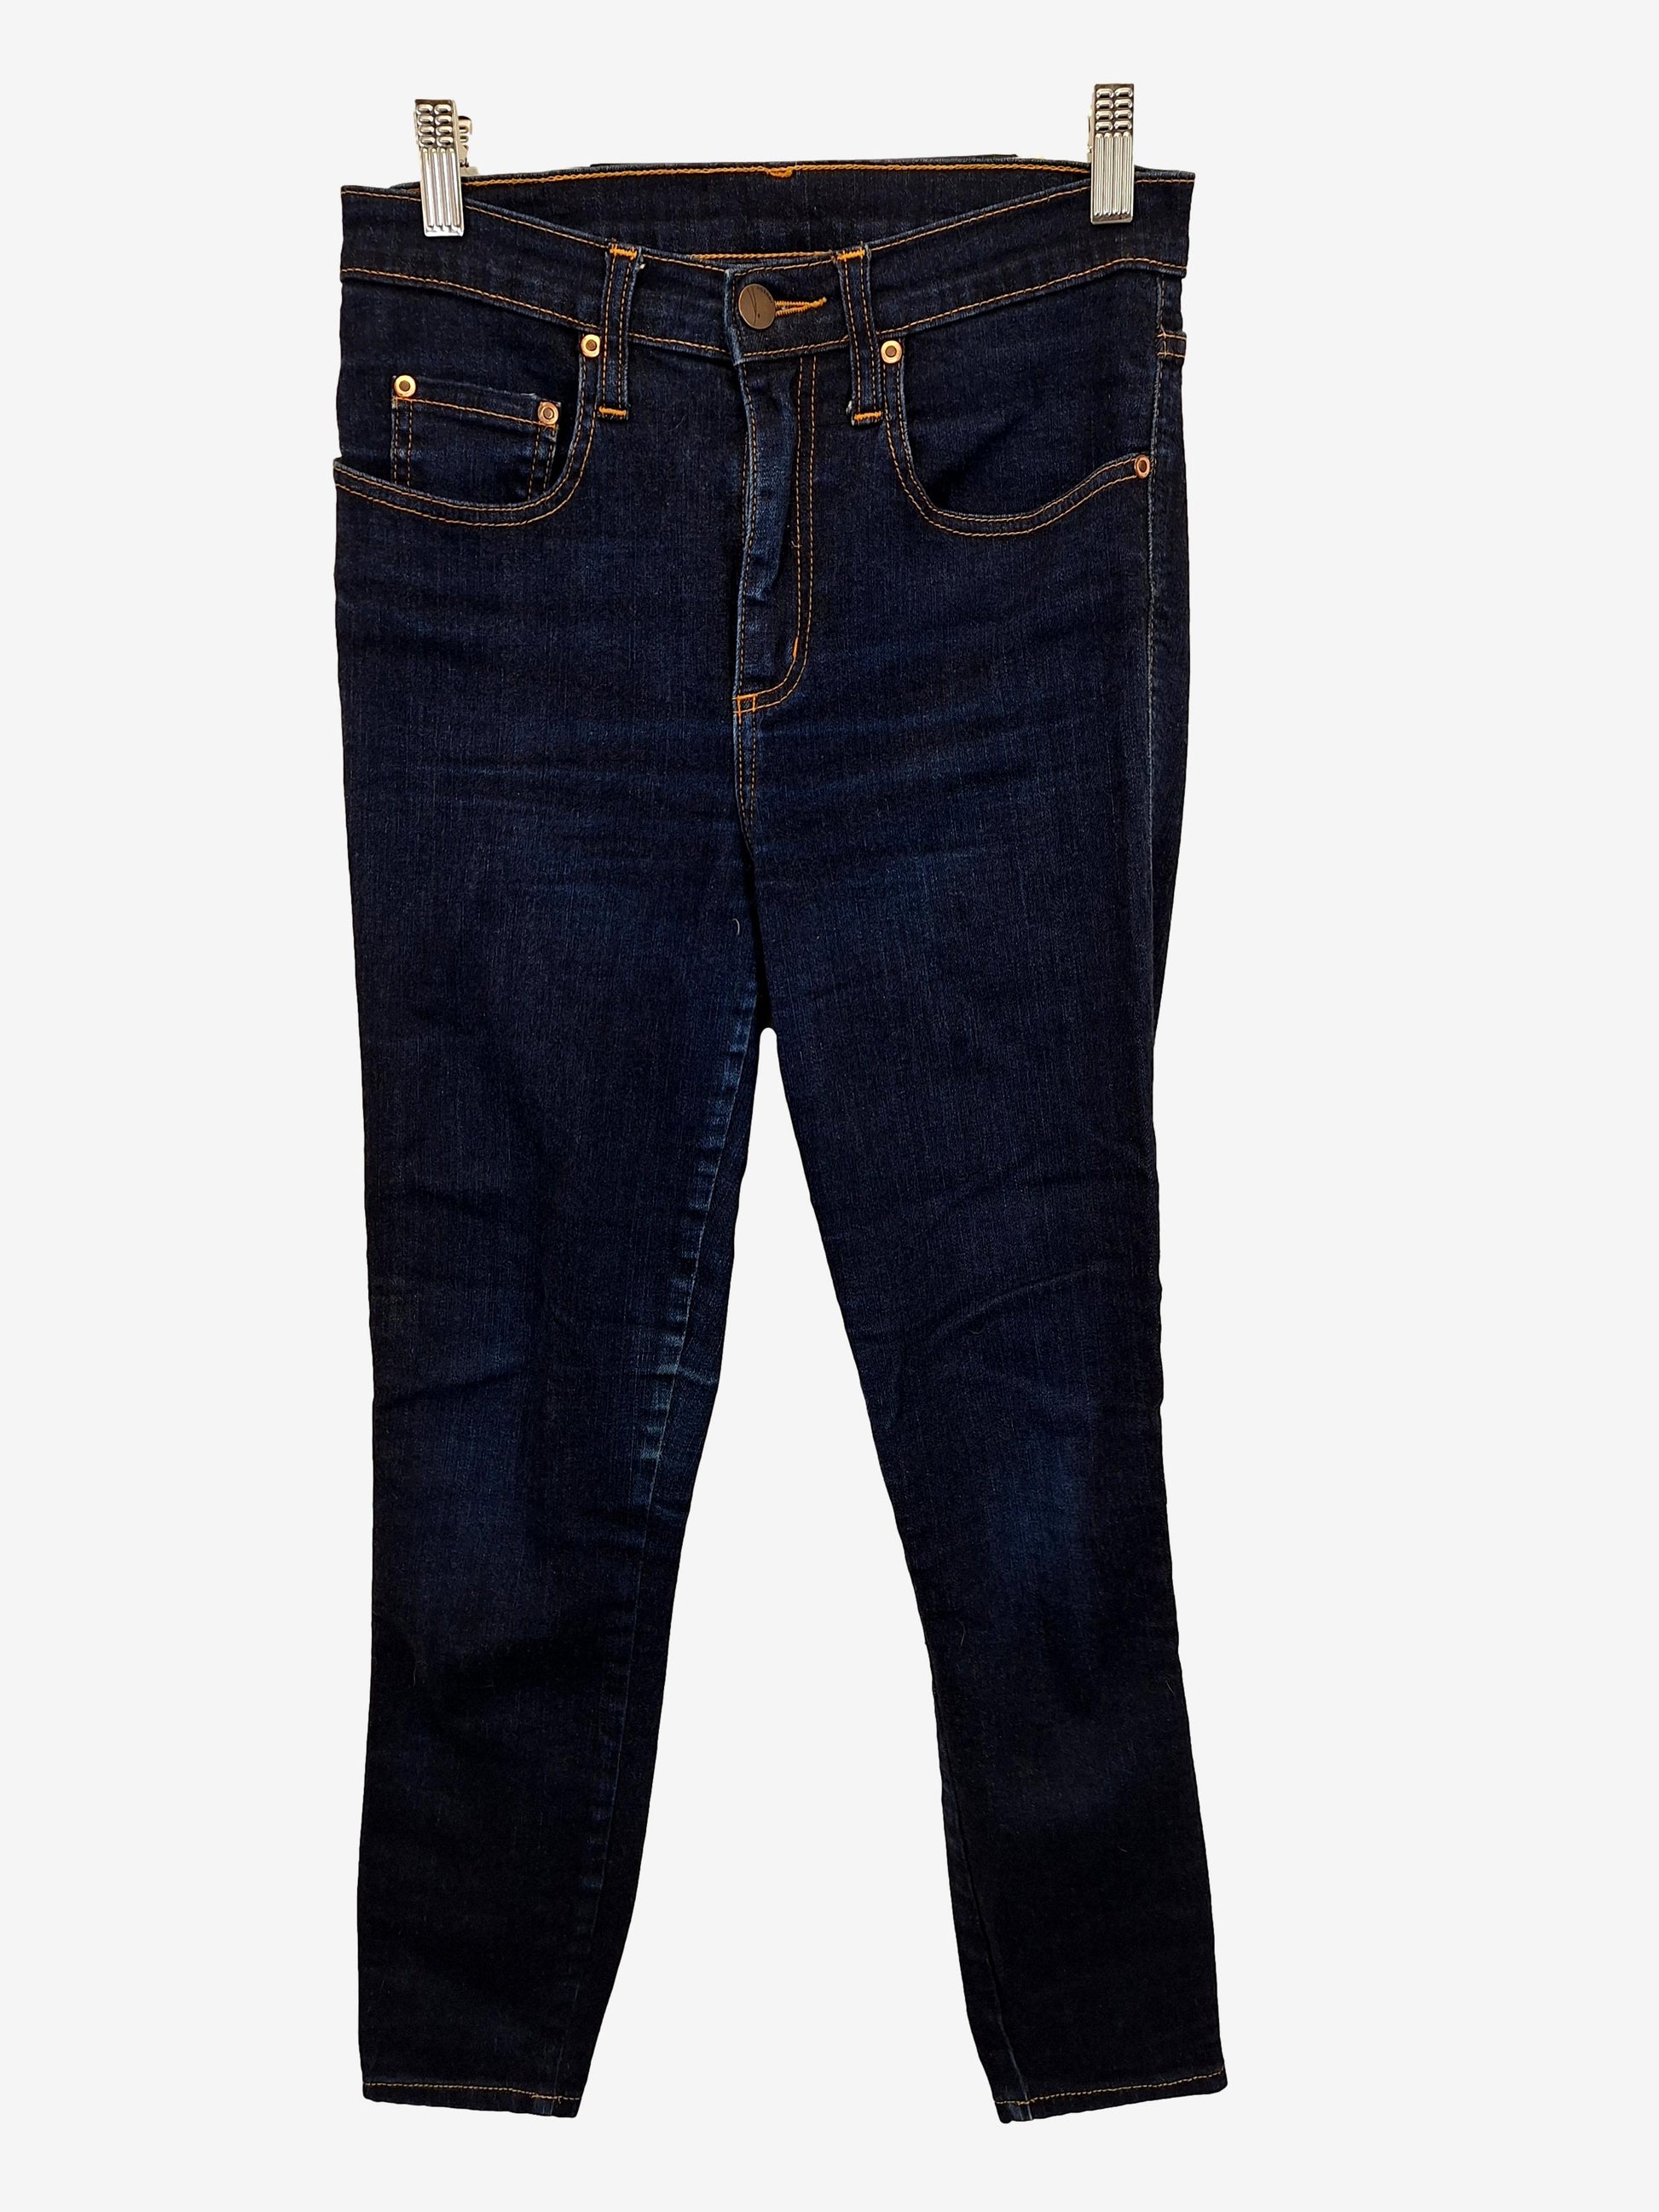 Nobody Cult Skinny High Rise Denim Jeans Size 10 by SwapUp-Online Second Hand Store-Online Thrift Store